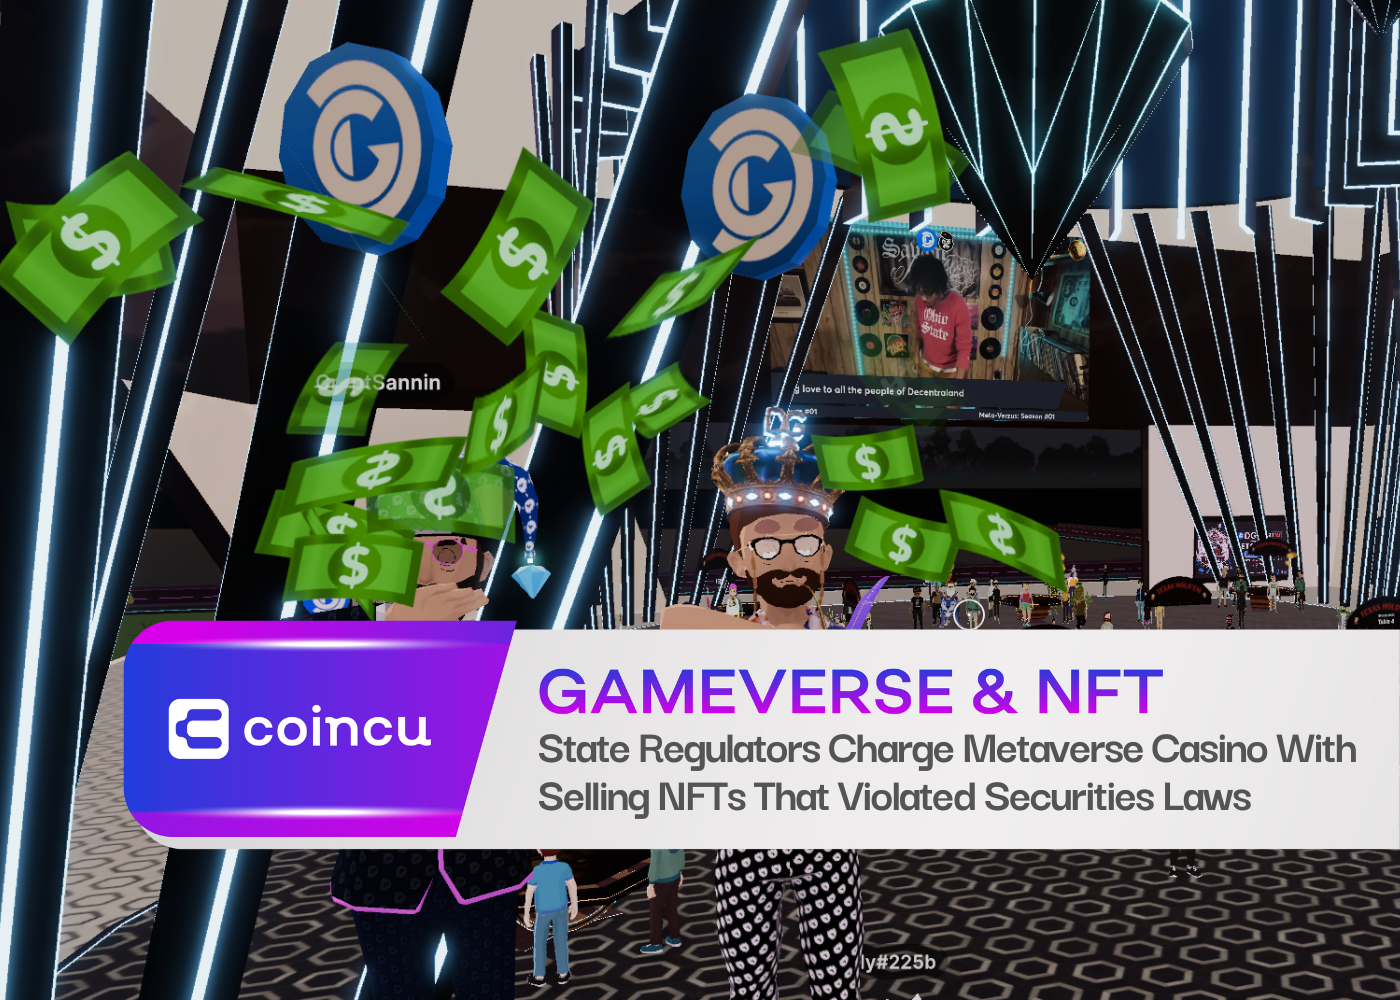 State Regulators Charge Metaverse Casino With Selling NFTs That Violated Securities Laws